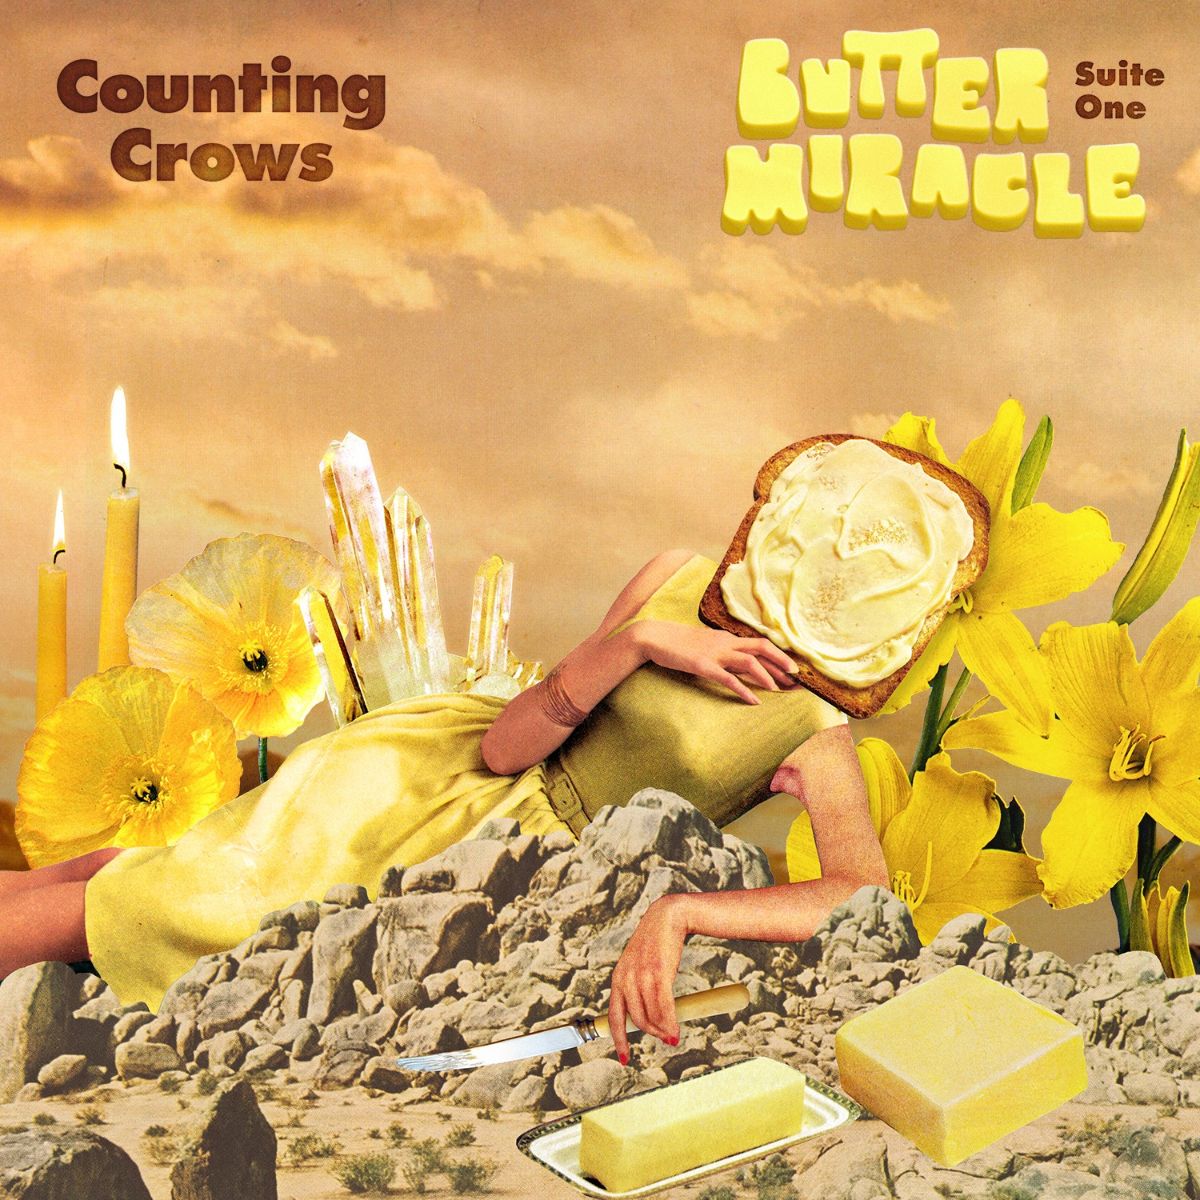 Counting Crows release brand new record 'Butter Miracle, Suite One'